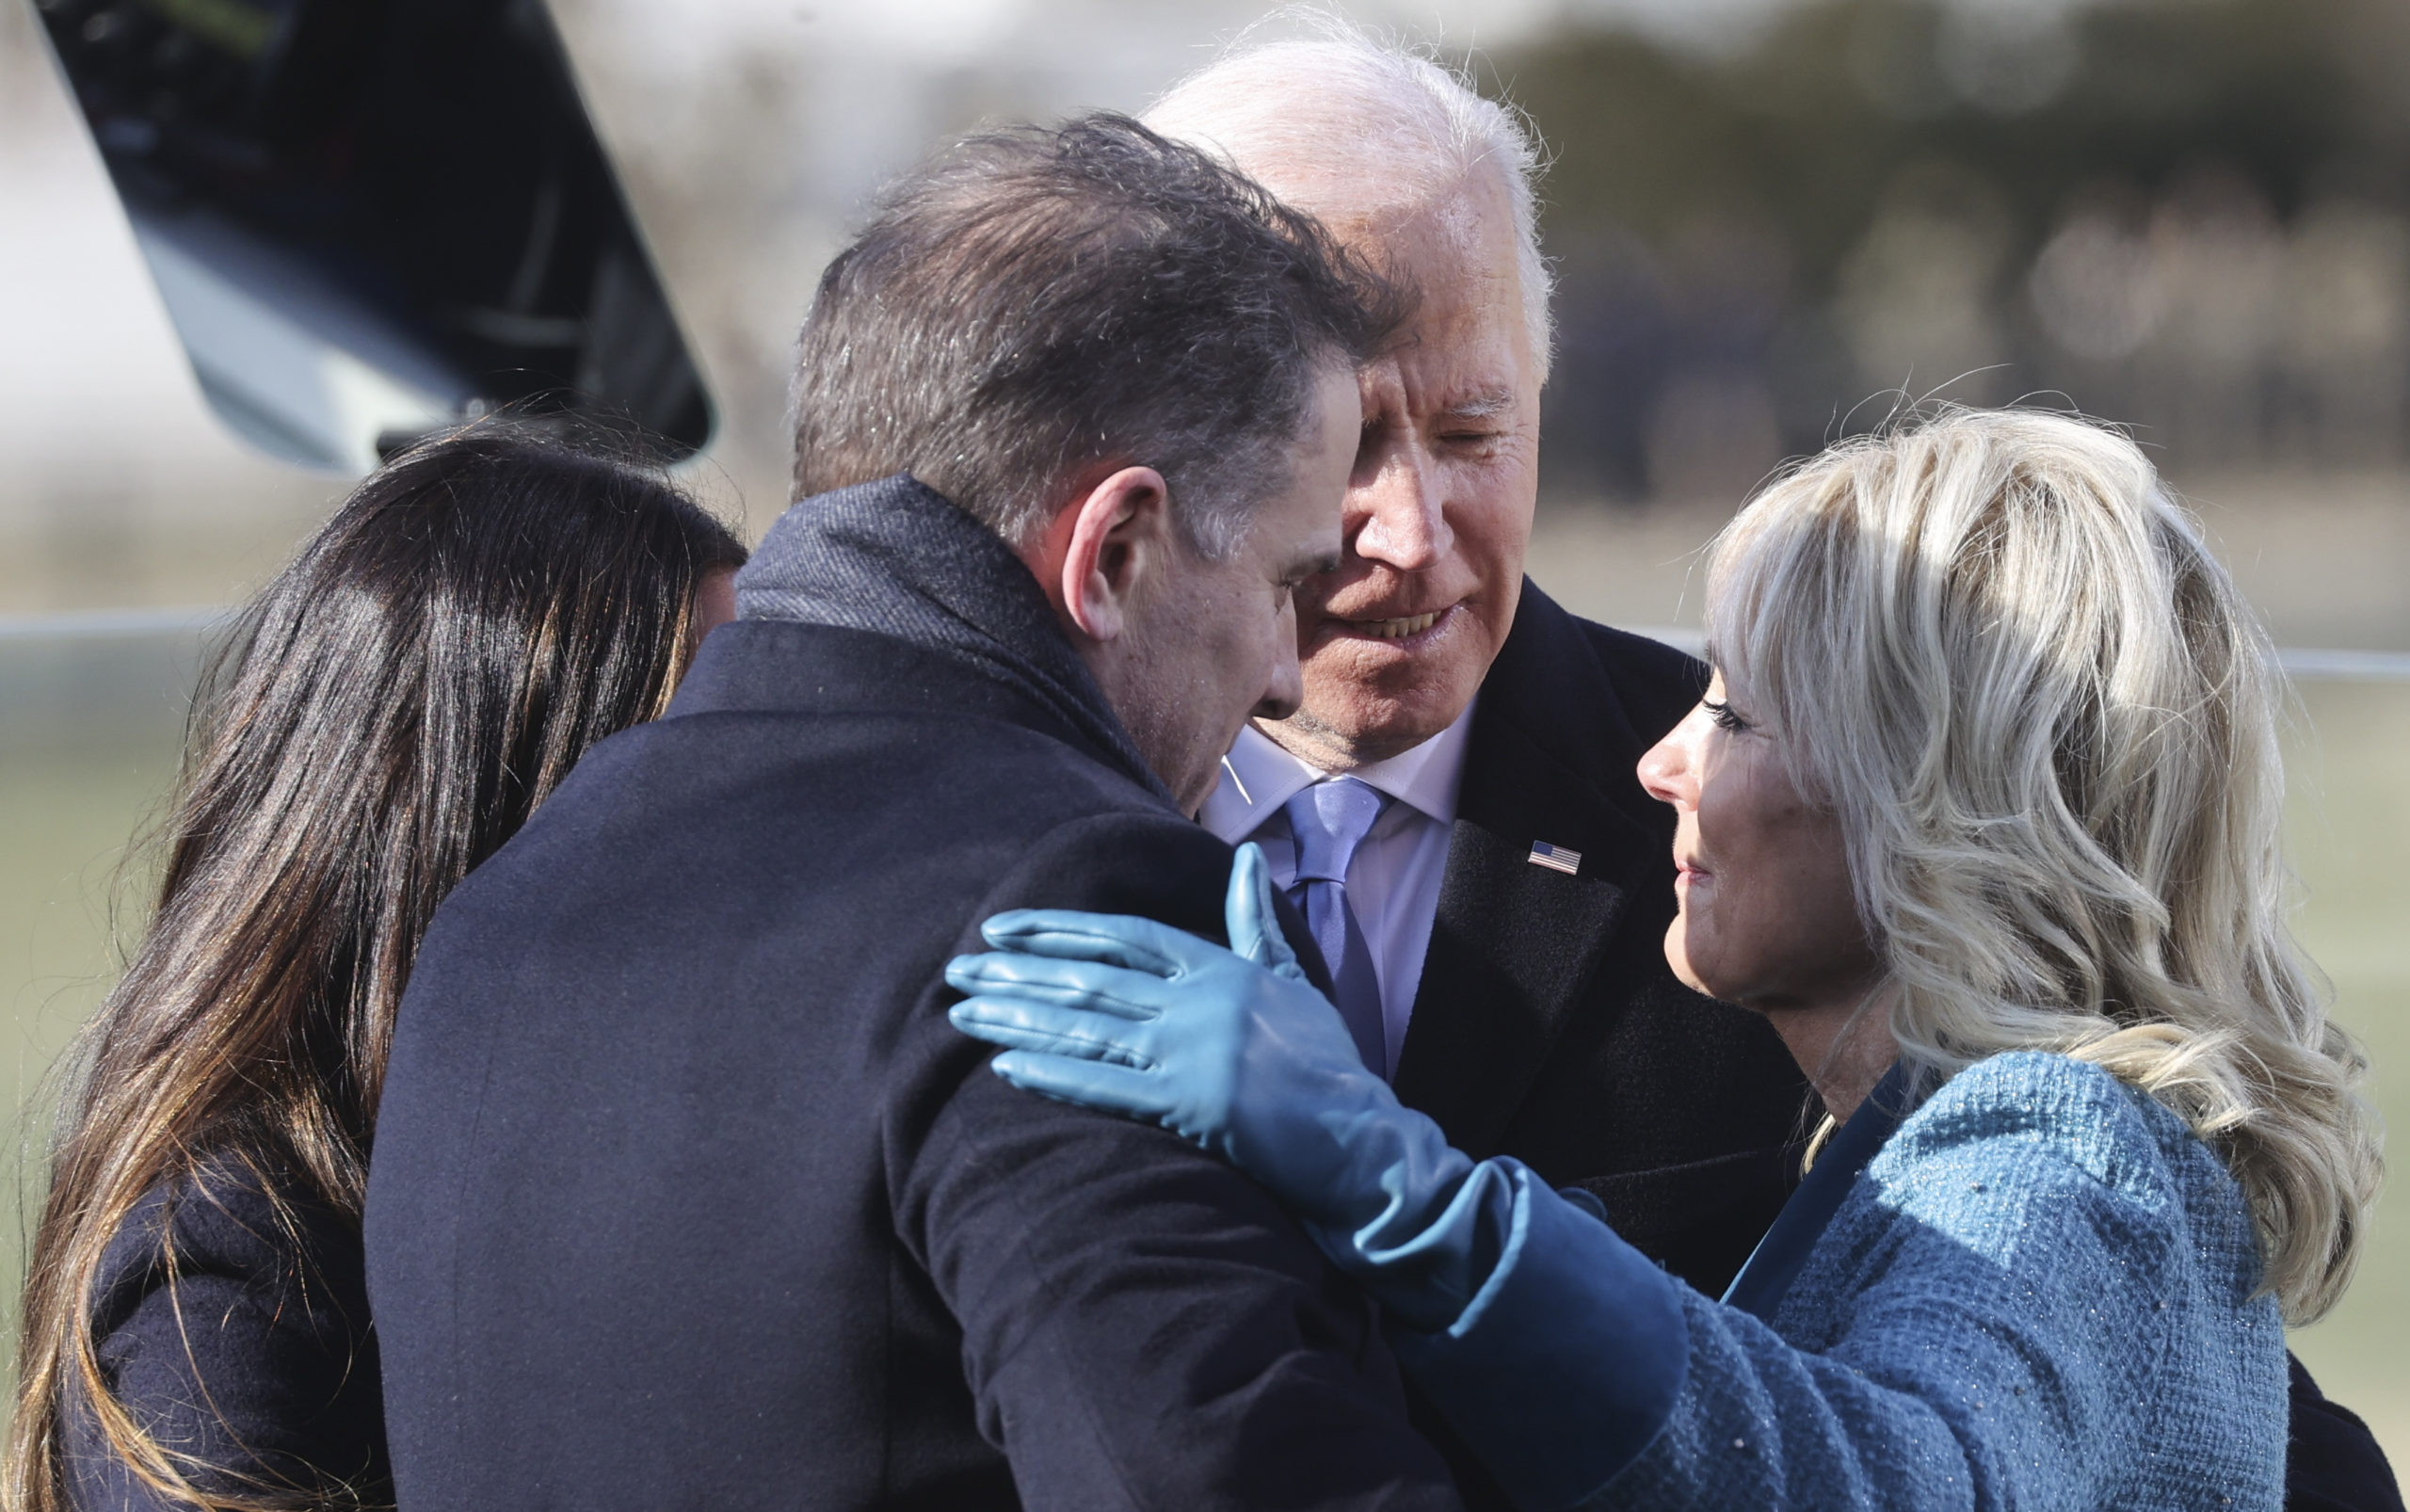 WASHINGTON, DC - JANUARY 20: U.S. President Joe Biden embraces his family after he was sworn in as the 46th President of the United States during his inauguration on the West Front of the U.S. Capitol on January 20, 2021 in Washington, DC. During today's inauguration ceremony Biden becomes the 46th president of the United States. (Photo by Jonathan Ernst-Pool/Getty Images)